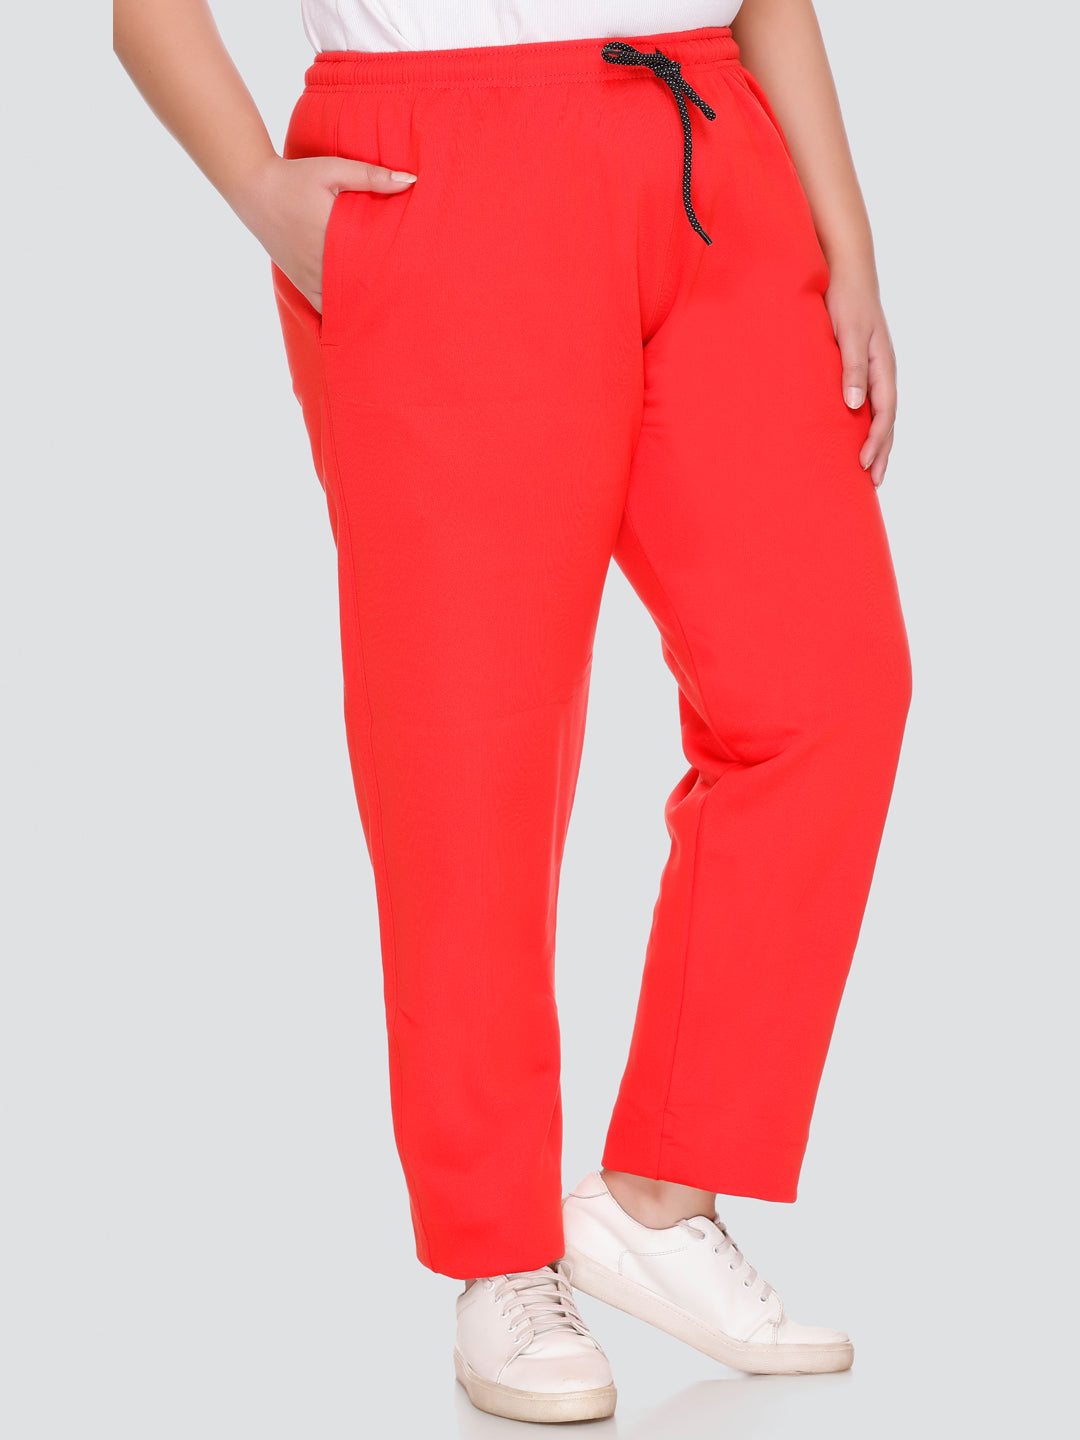 Stylish Coral Red Winter Wear Fleece Track Pants For Women (M To 5XL) Online In India